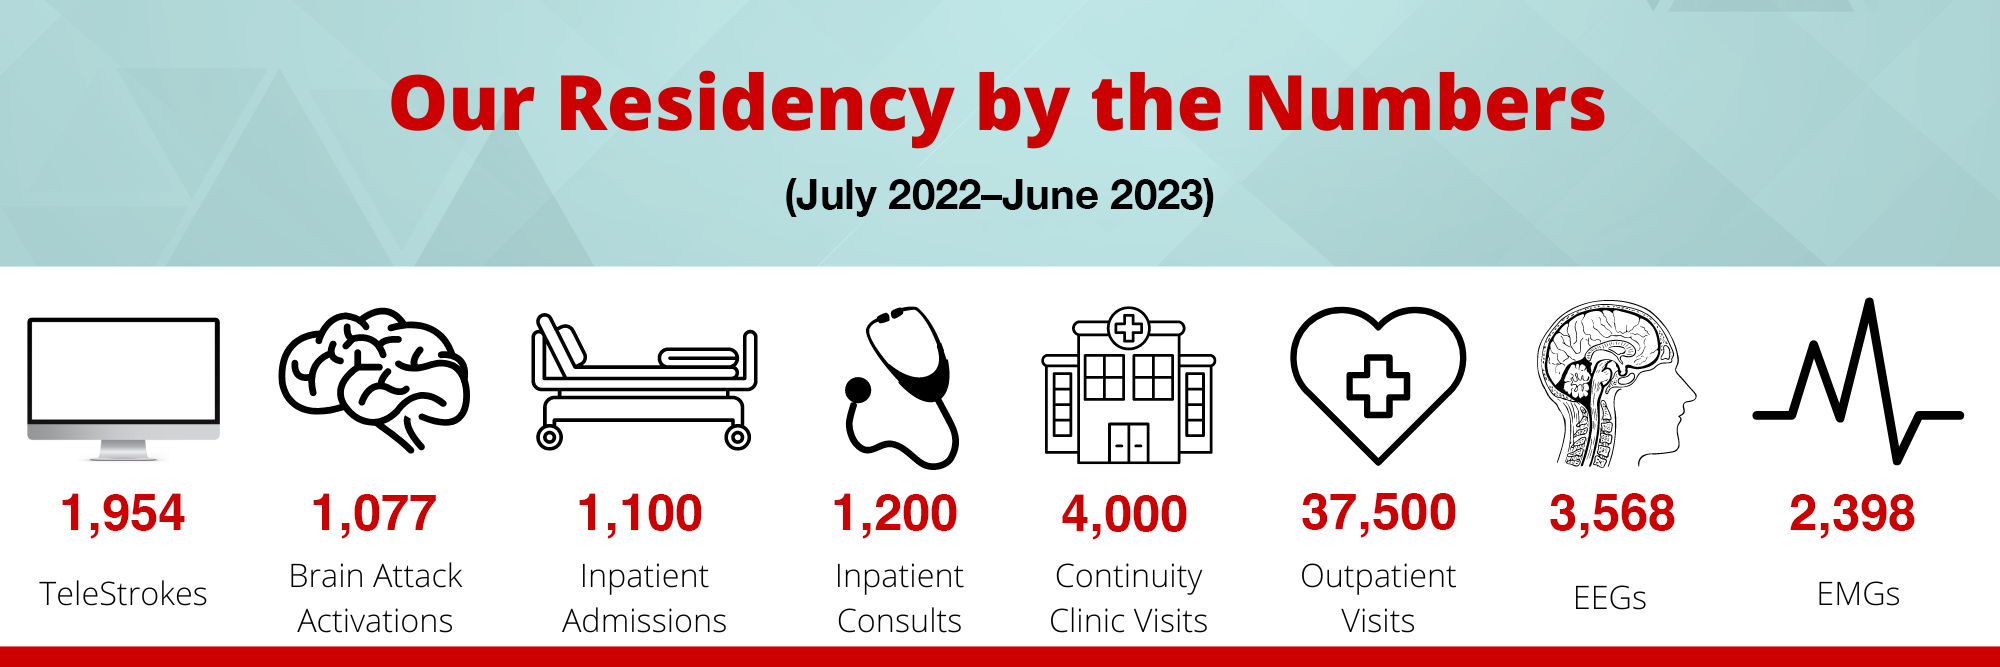 Our Residency By the Numbers